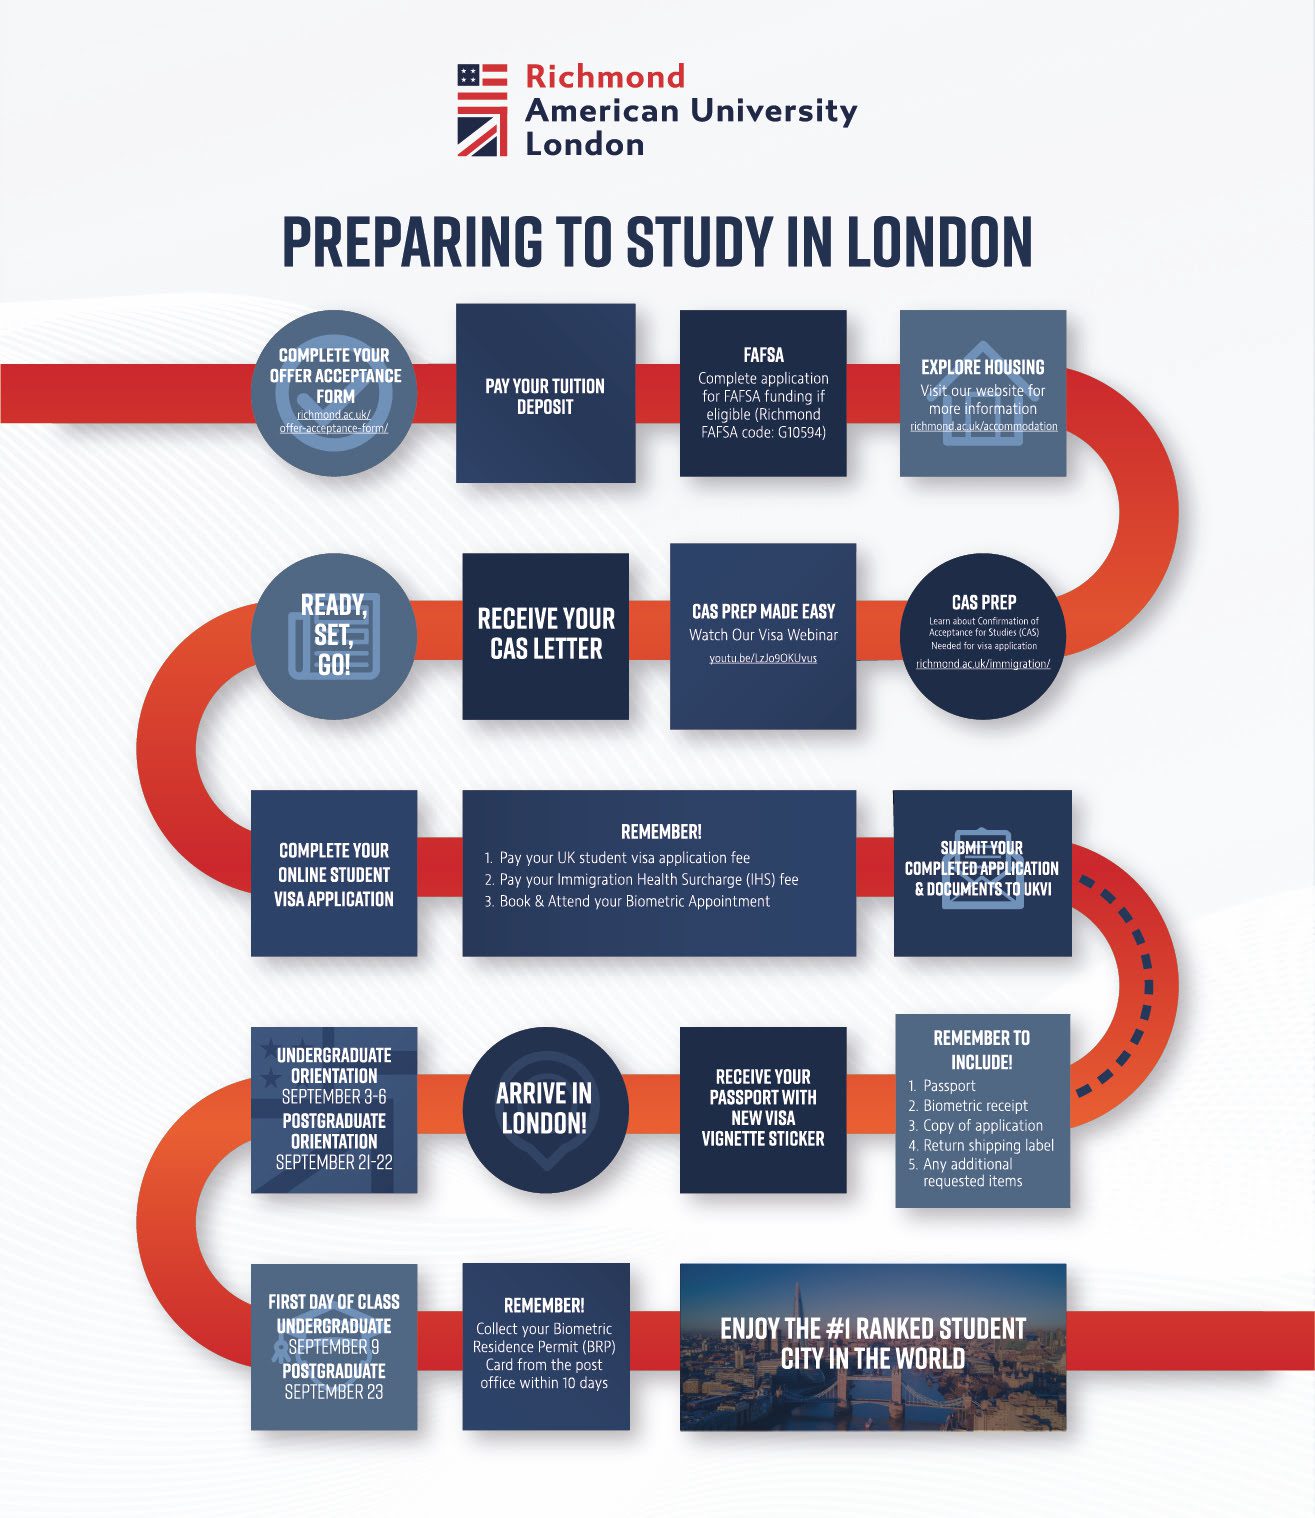 This image is an infographic by Richmond American University London detailing steps for preparing to study in London, including acceptance, housing, visa, and orientation information.